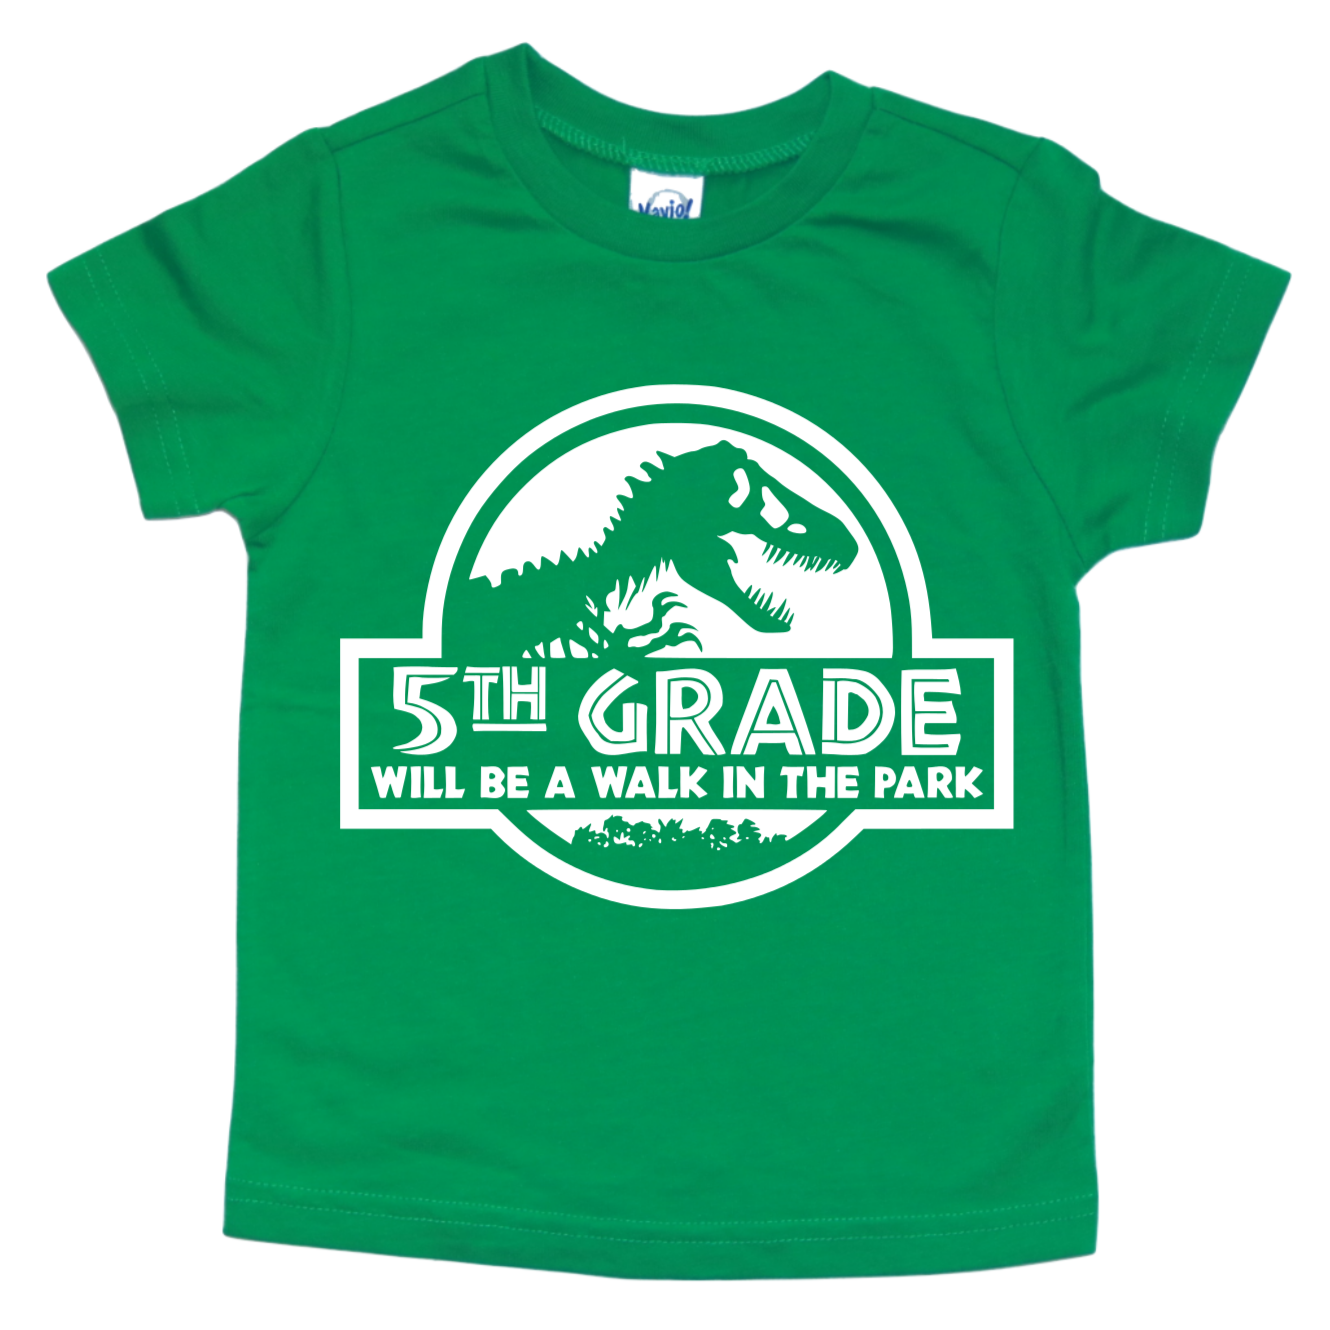 5TH GRADE WILL BE A WALK IN THE PARK KIDS SHIRT